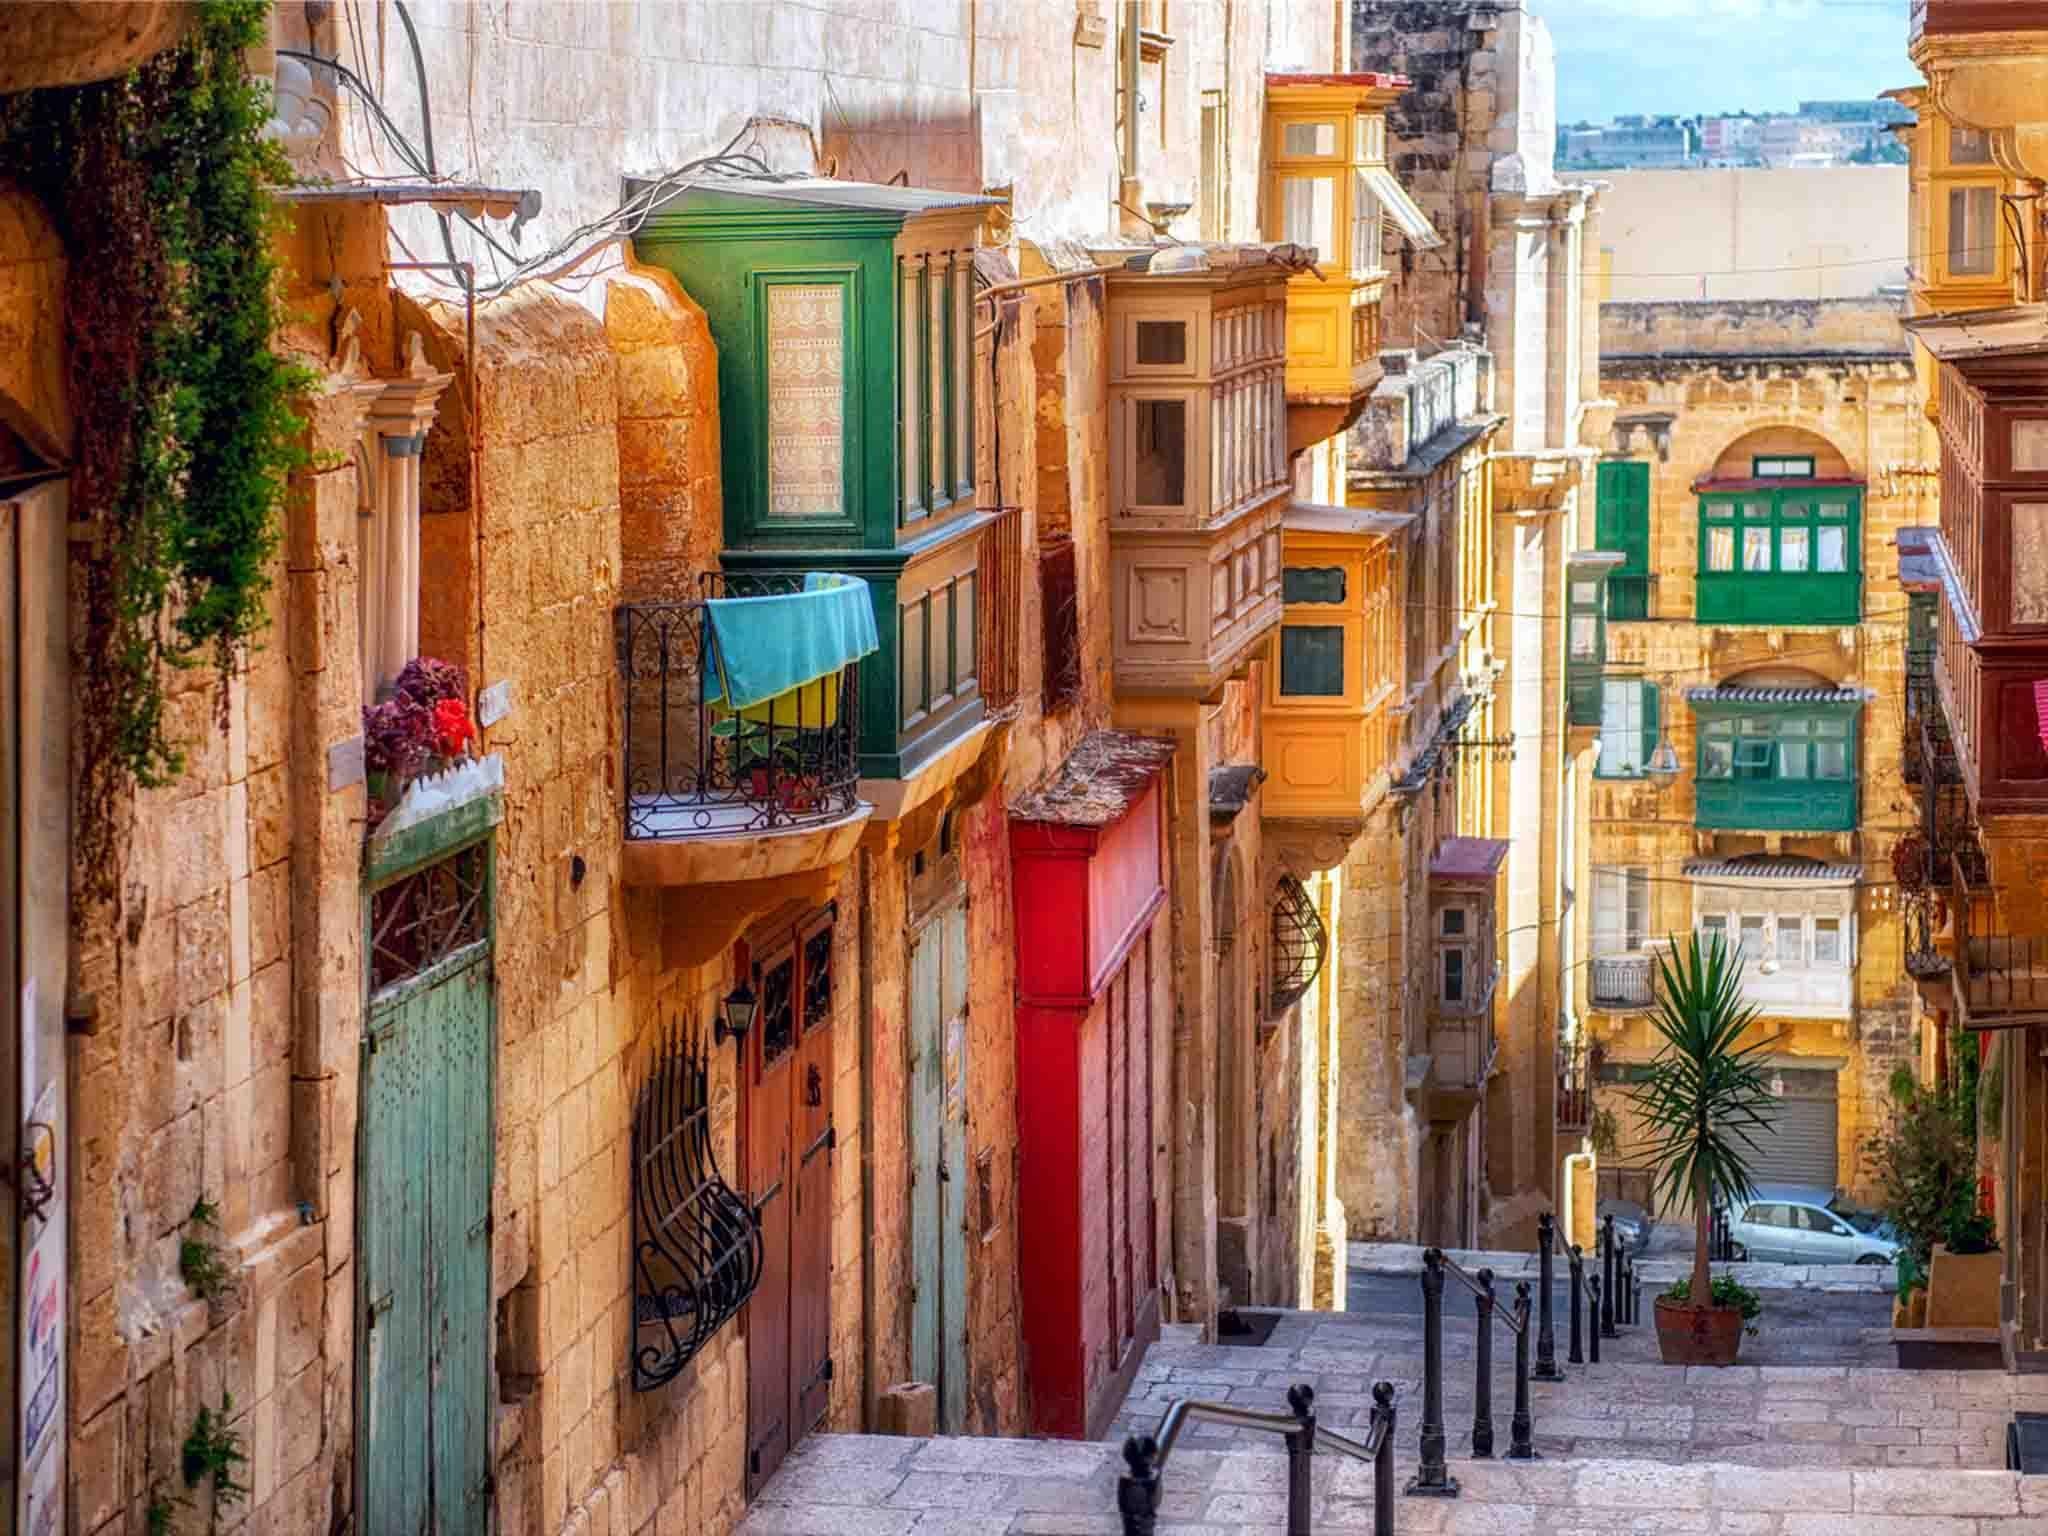 Valletta is wrapping up its year as capital of culture